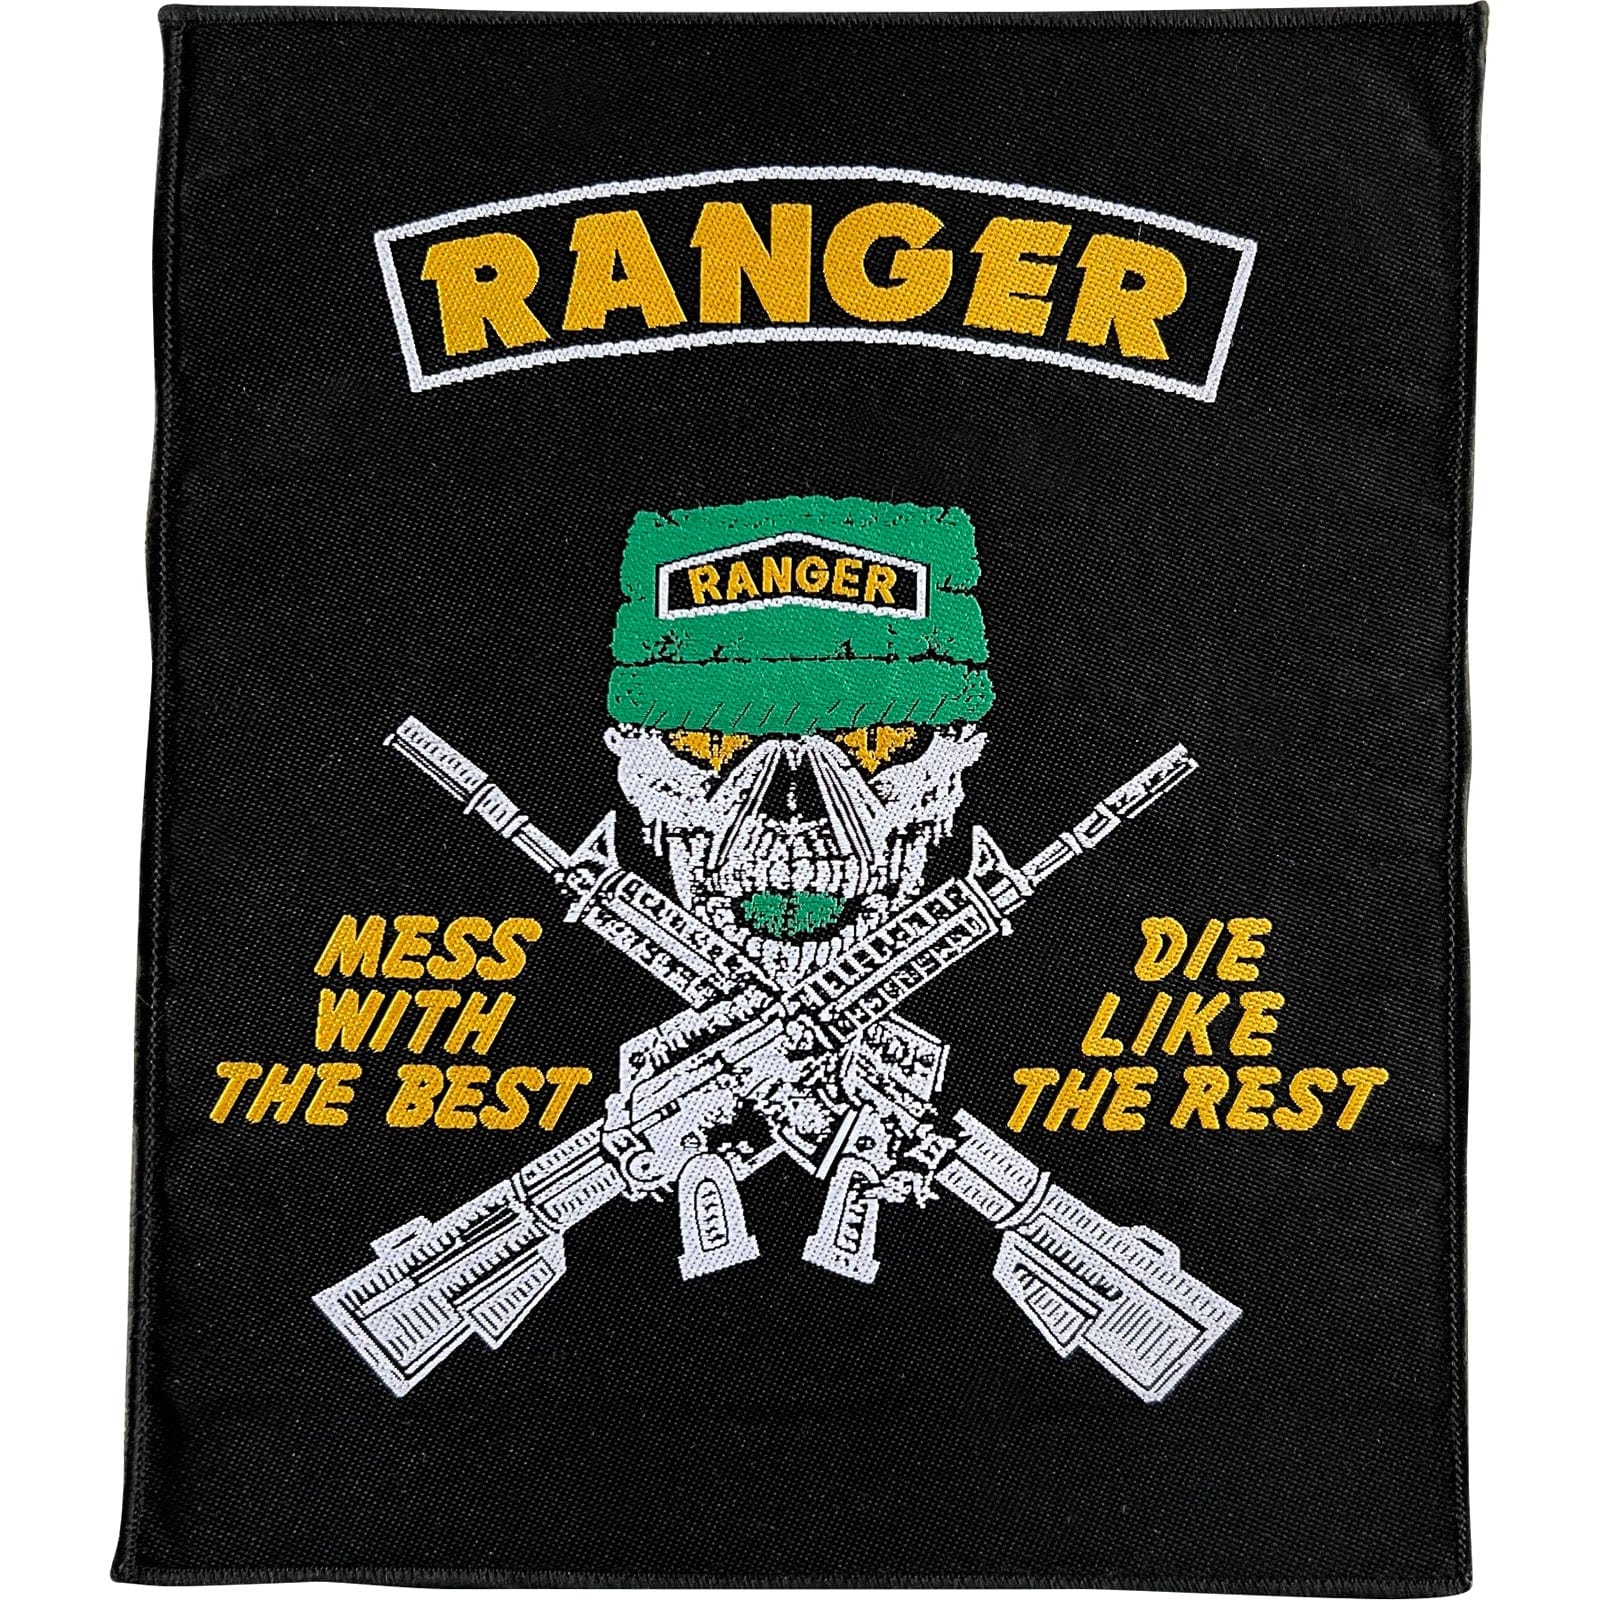 Big Large United States Army Ranger Sew On Patch Clothes Bag Embroidered Badge